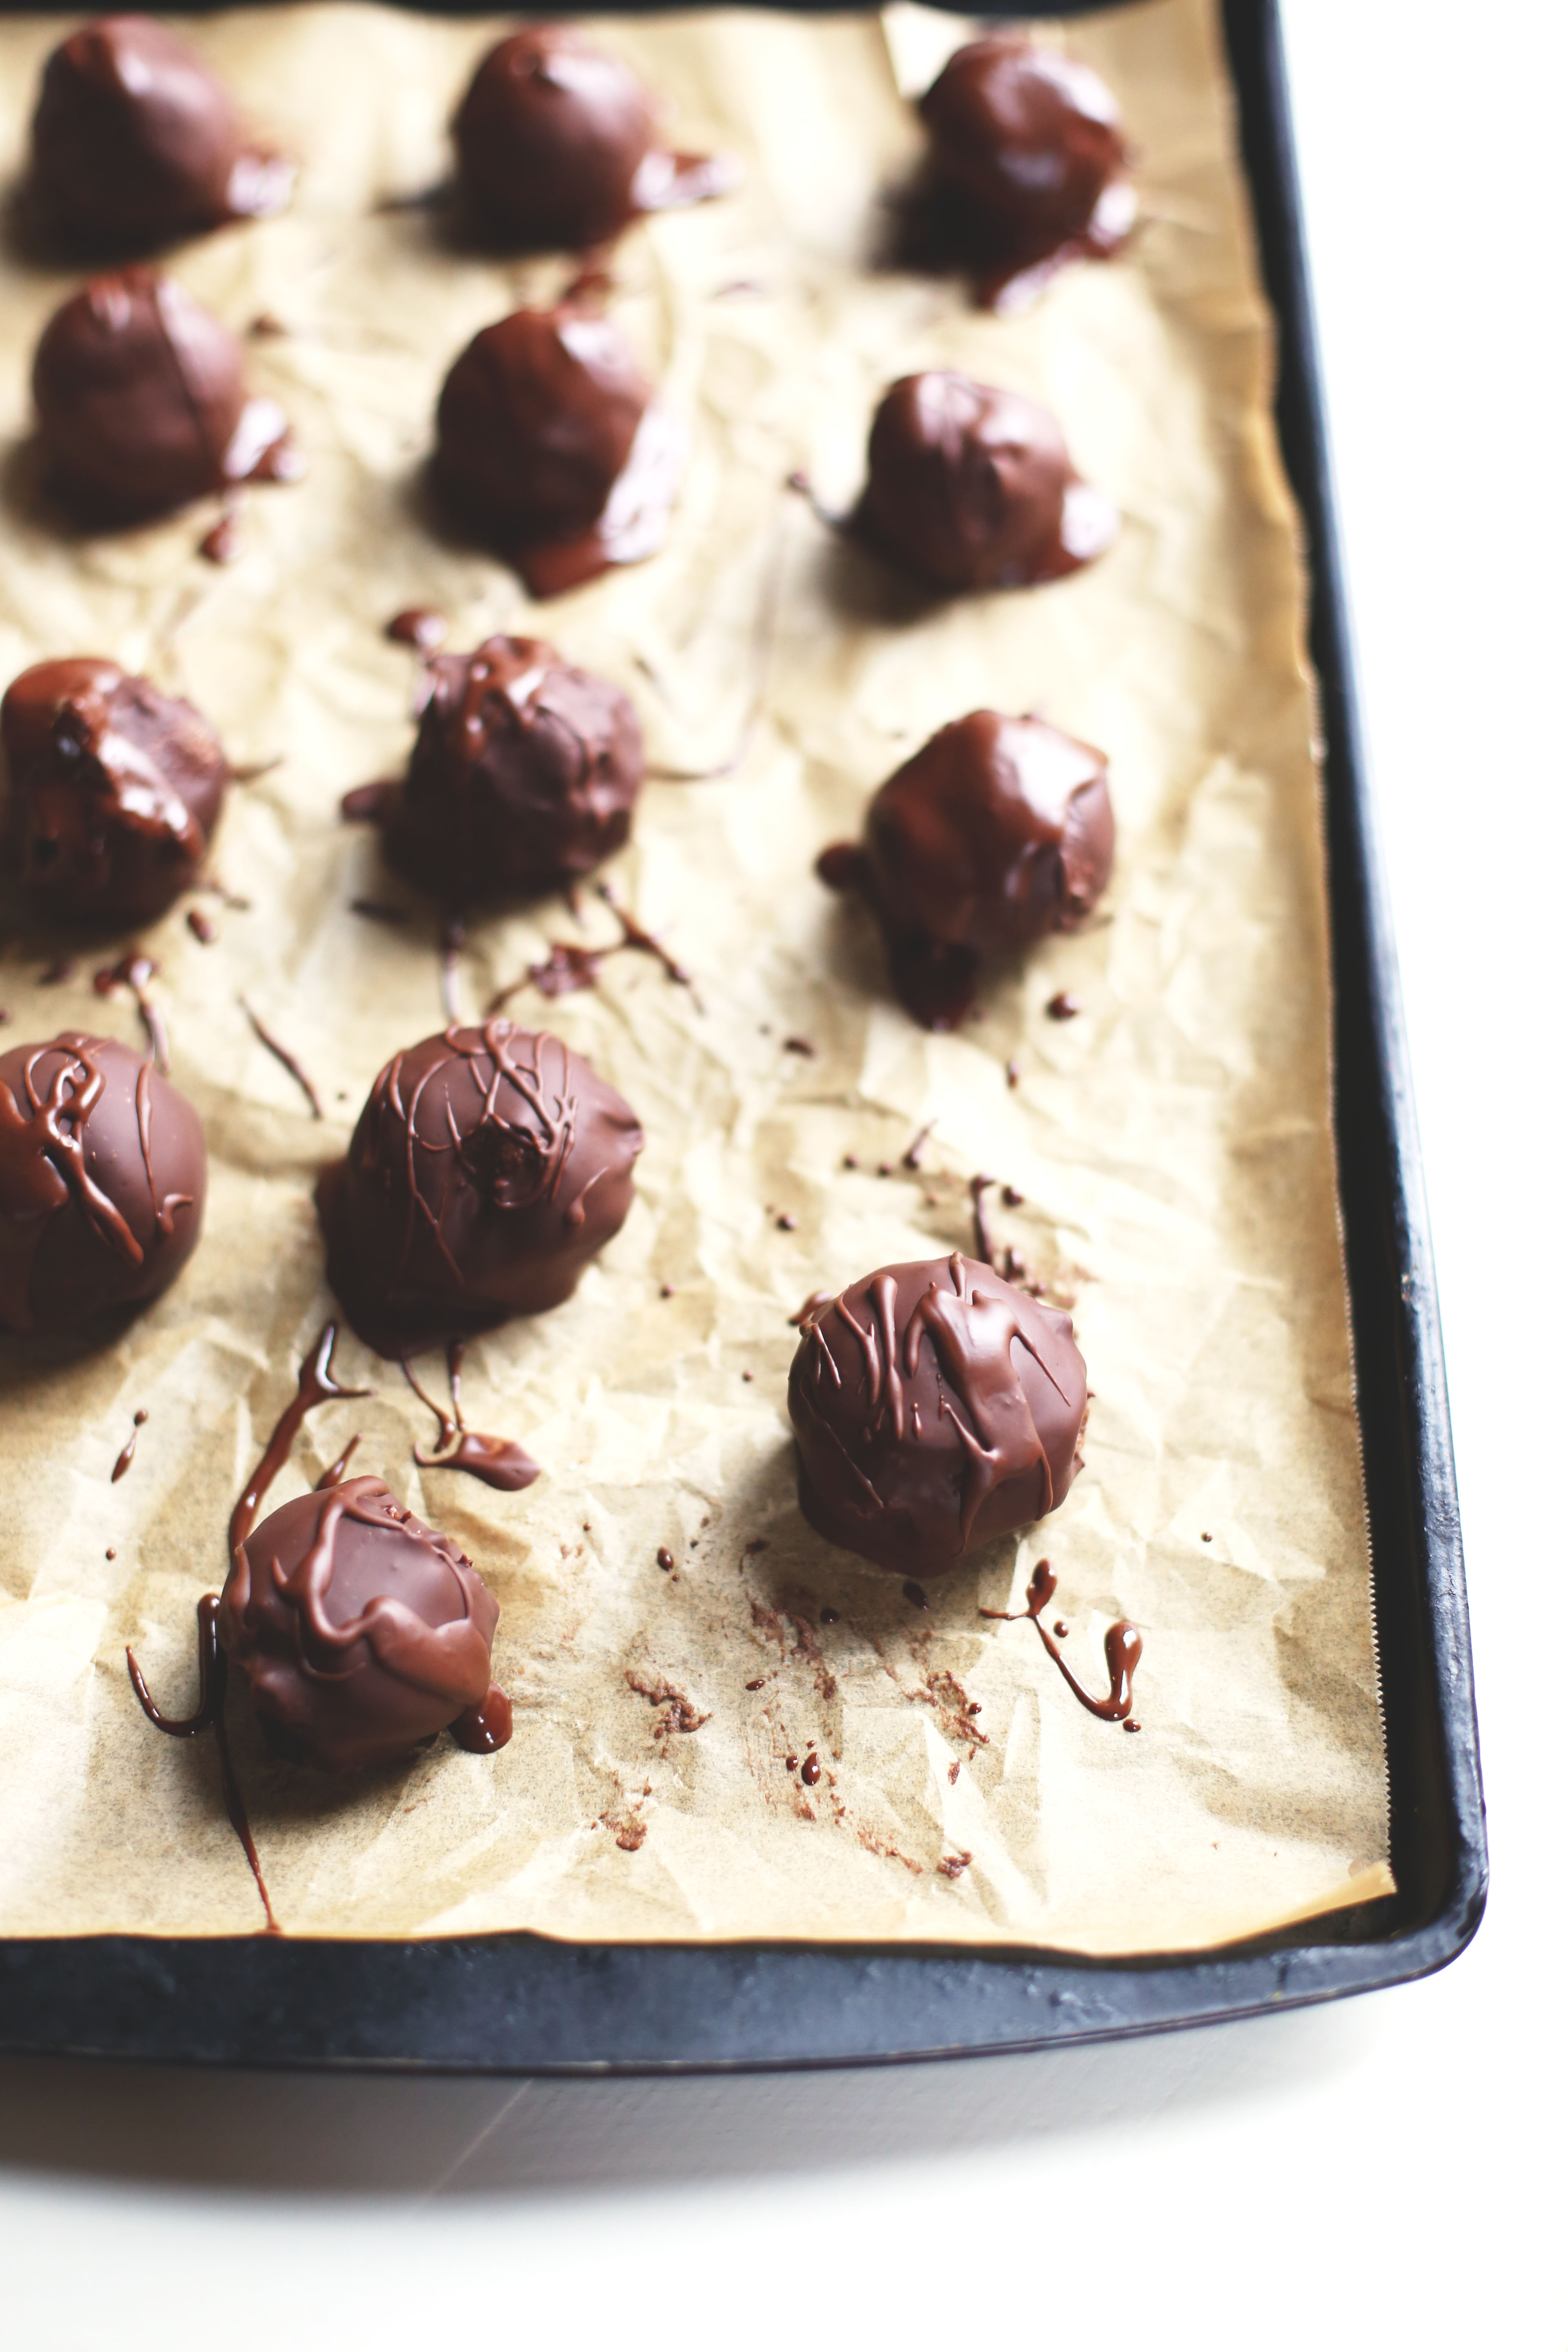 Celebrate Valentine’s Day right with these scrumptious vegan chocolate truffles that will melt in your mouth.